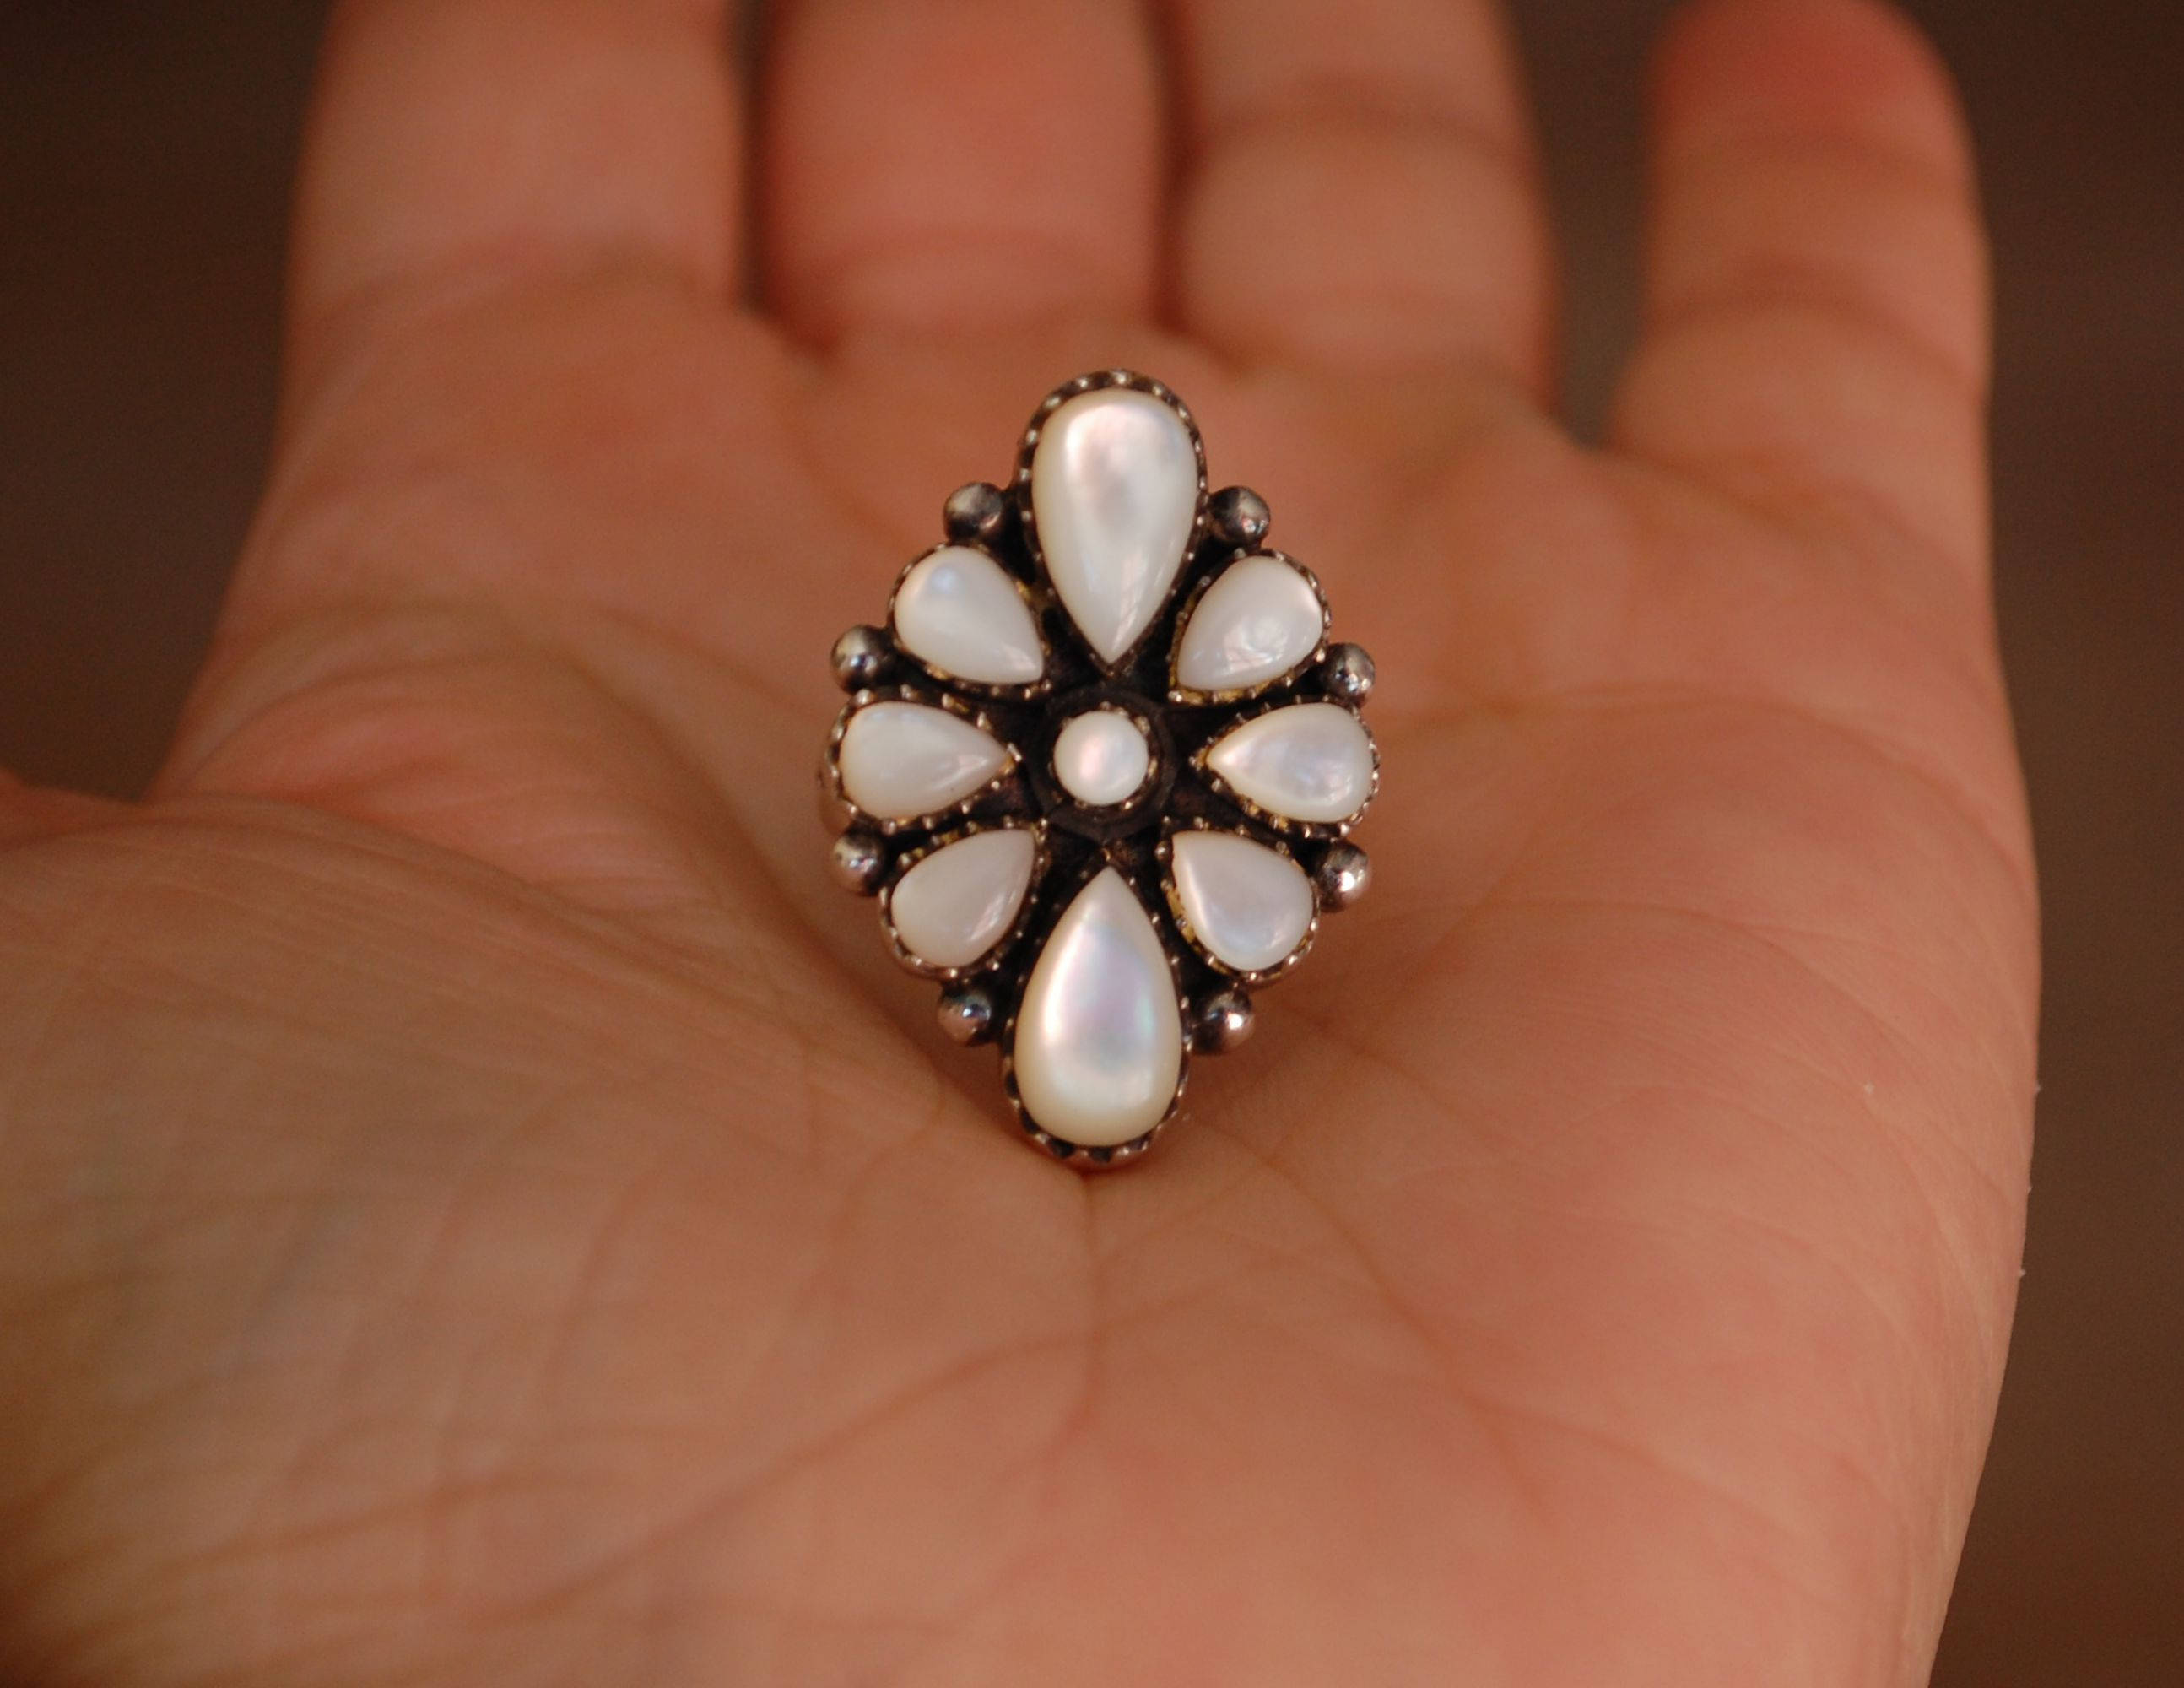 Native American Navajo Mother of Pearl Ring - Size 6